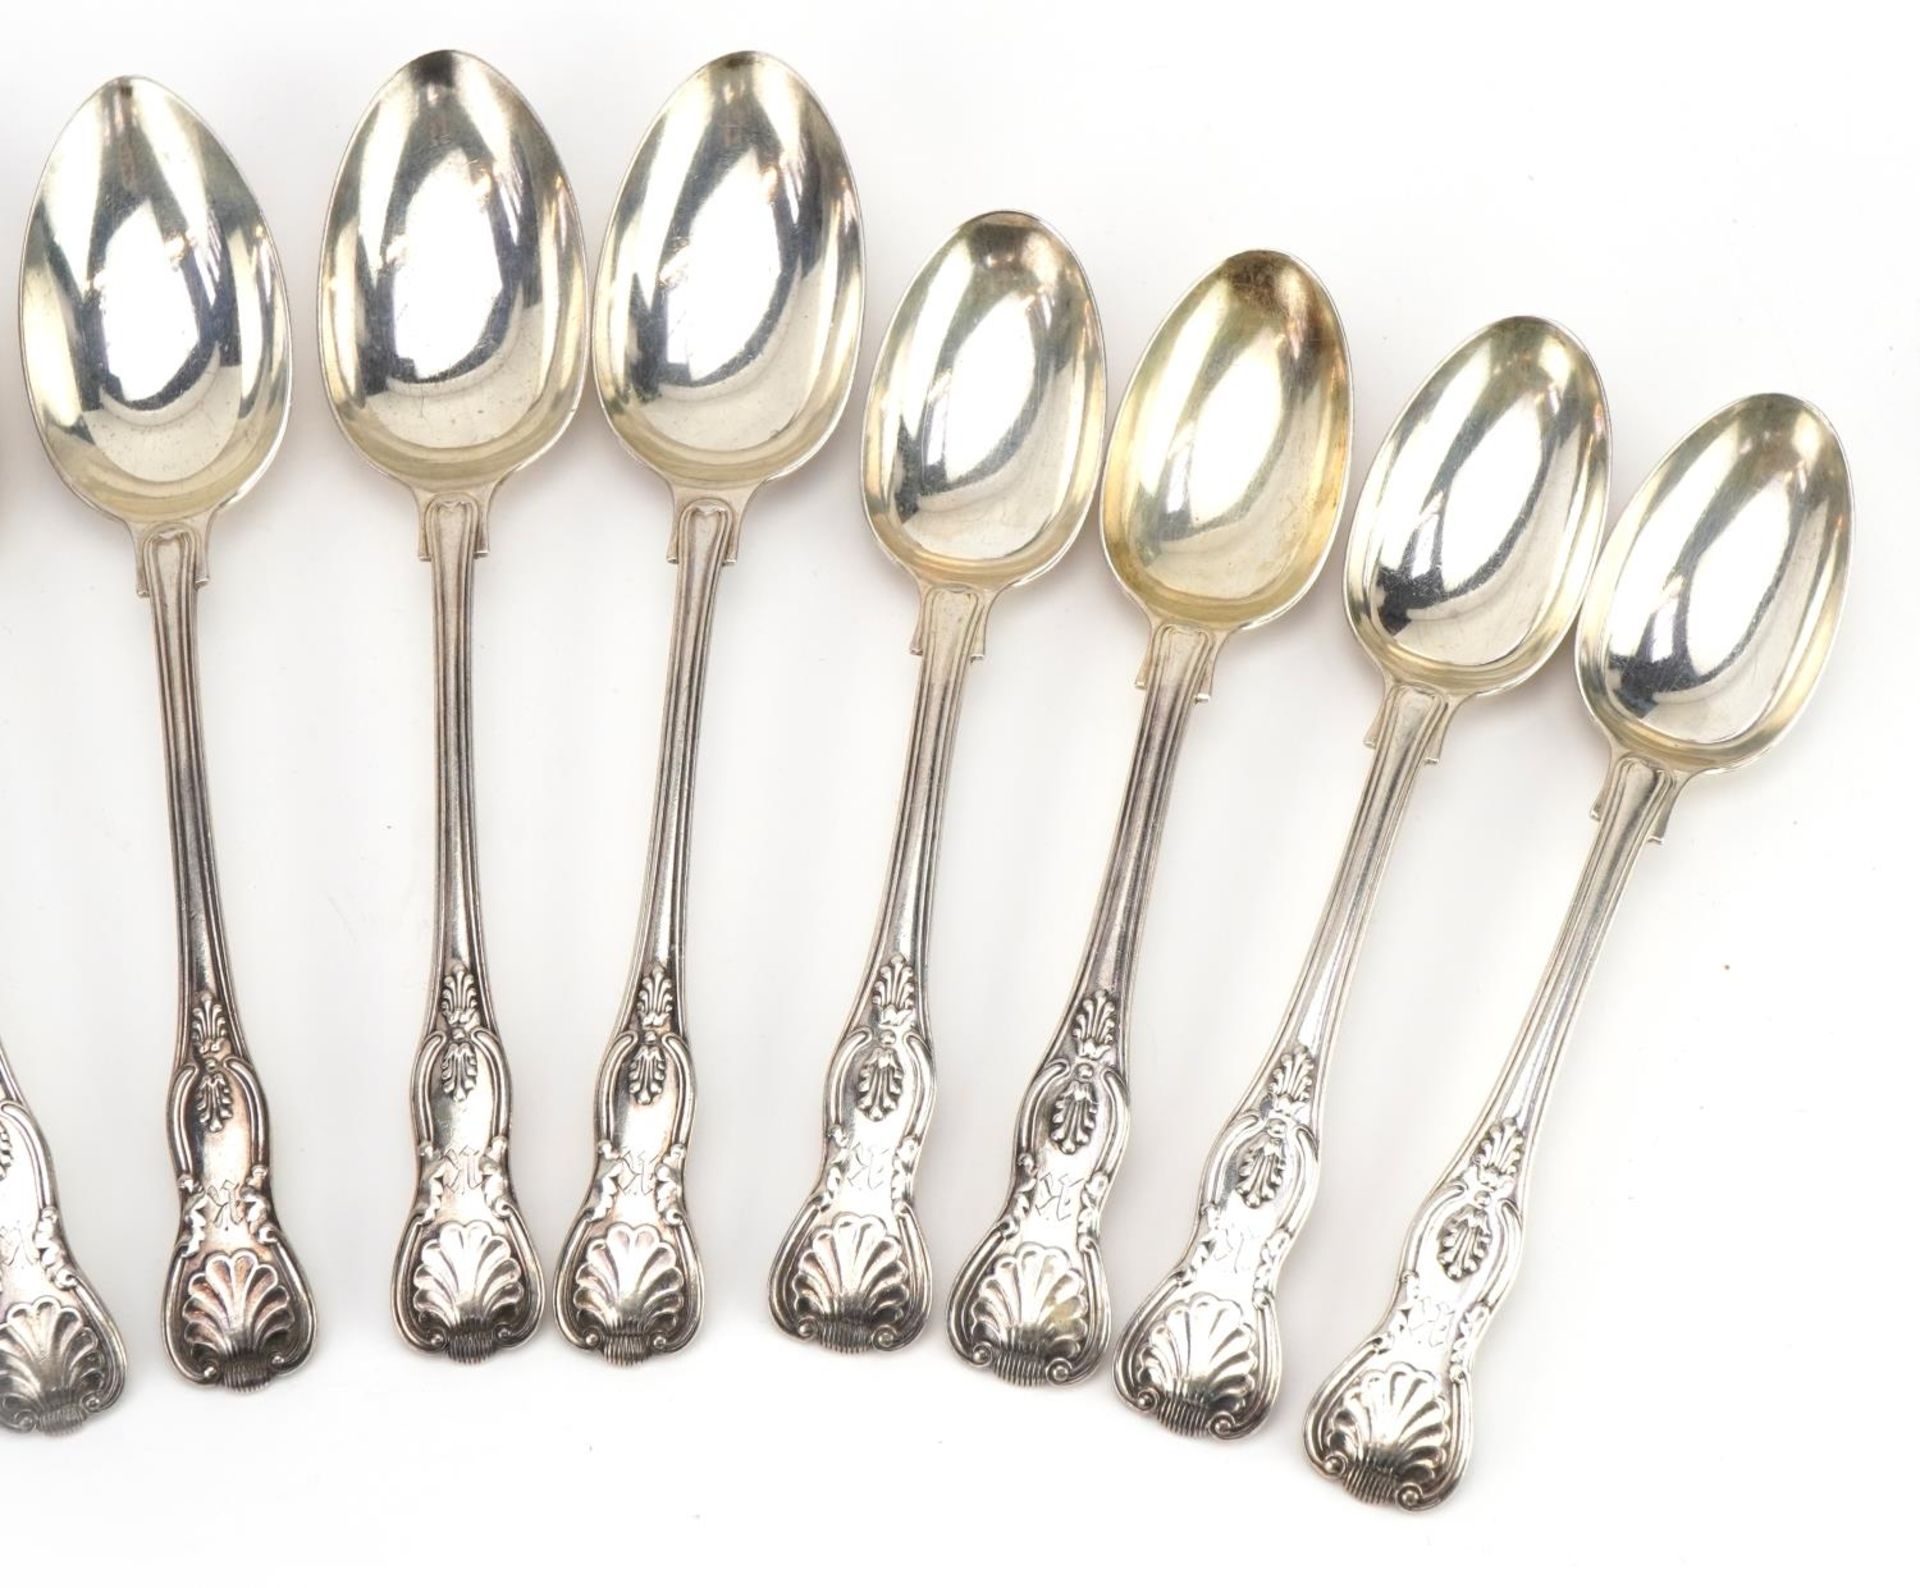 Elkington & Co Ltd, Edwardian silver cutlery comprising three table forks, five tablespoons, four - Image 3 of 4